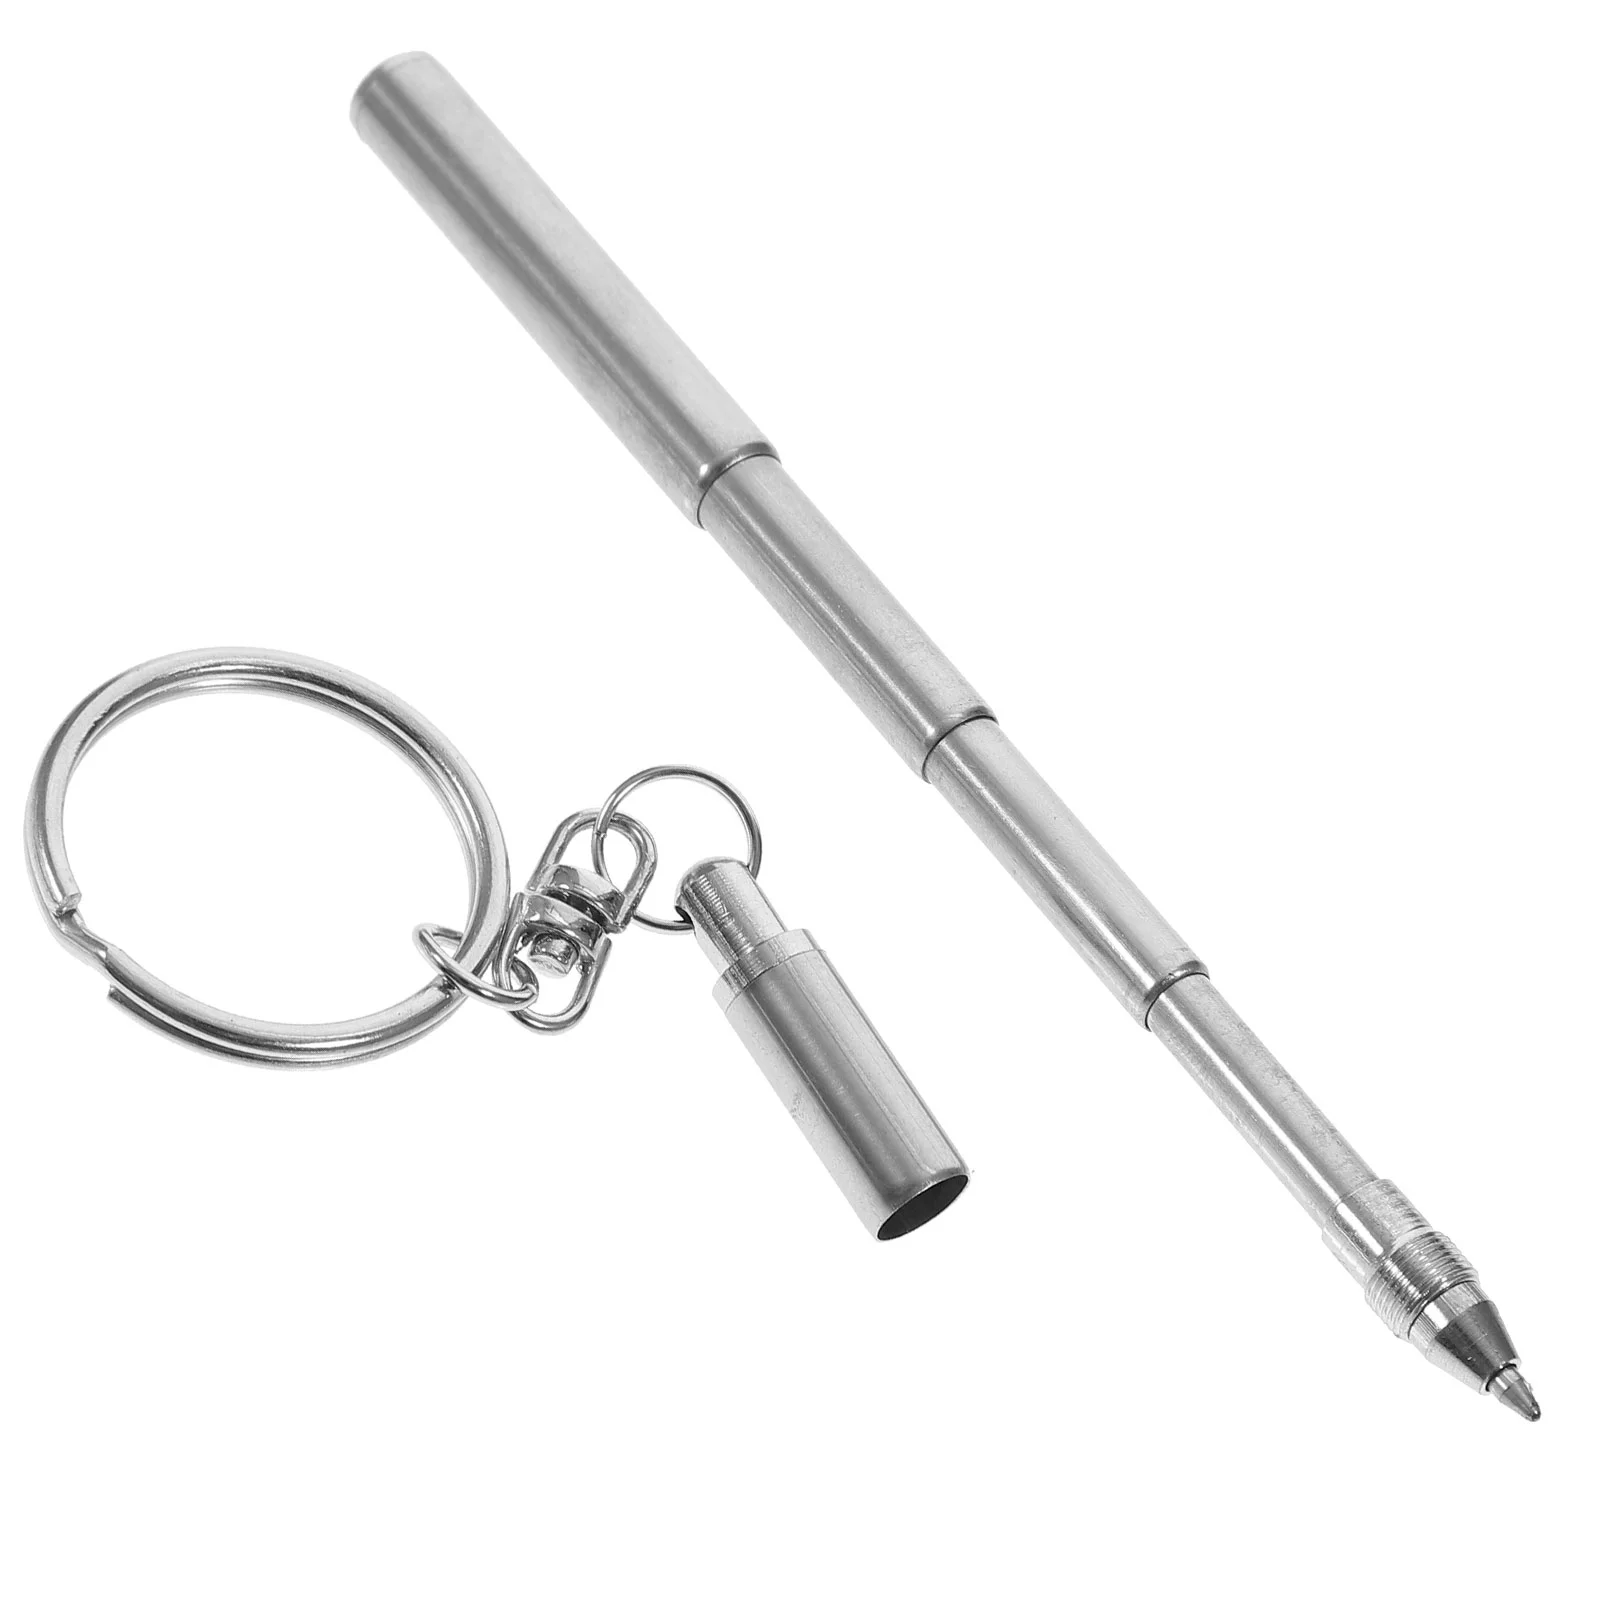 Retractable Pen Shape Keychain Mini Metal Key Ring Portable Stainless Steel Telescopic Ball Point Pens Black Keychain Tools